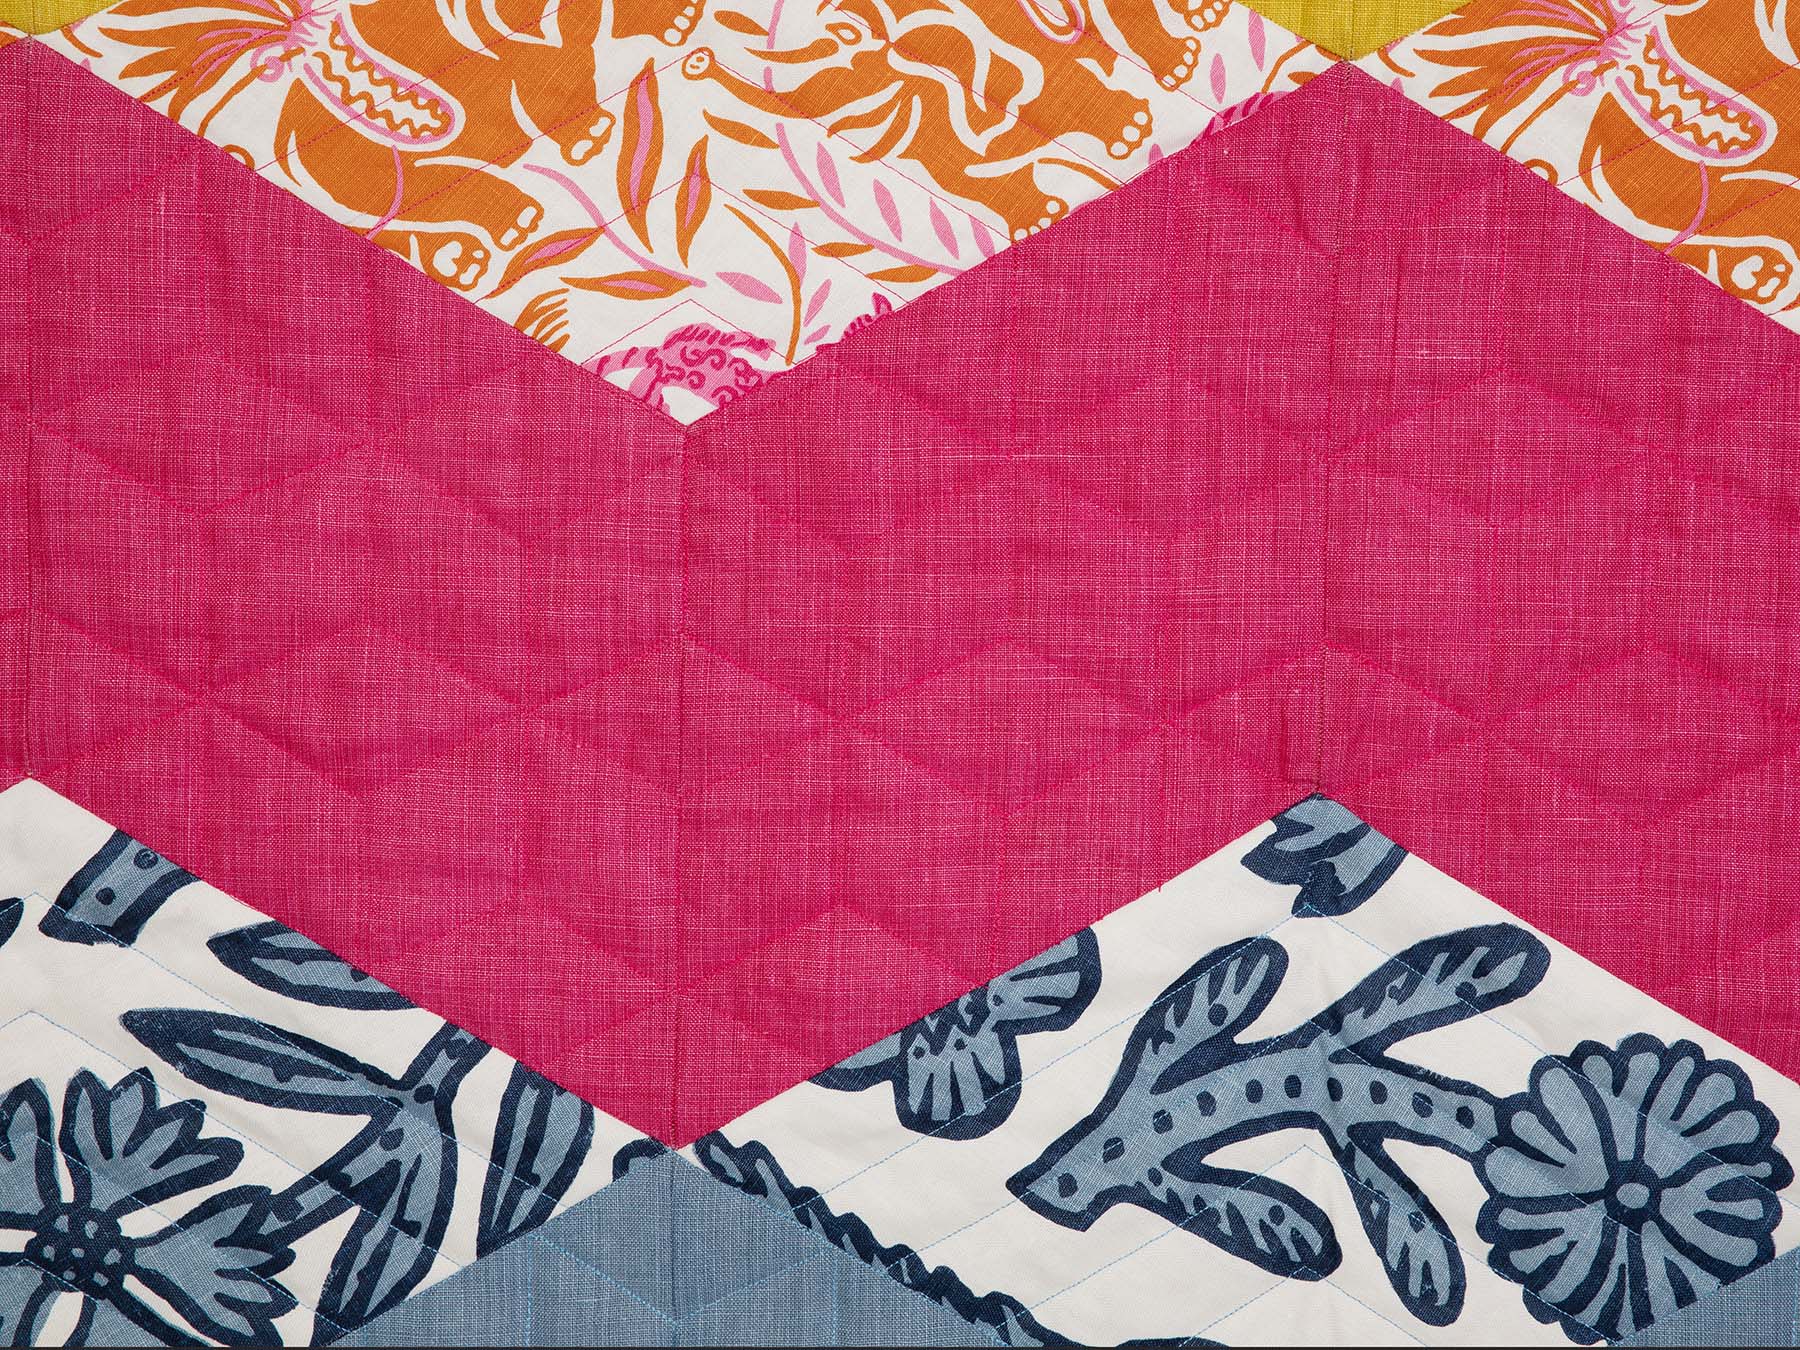 Threads of Life: A Designer Quilt Exhibition During Nantucket by Design